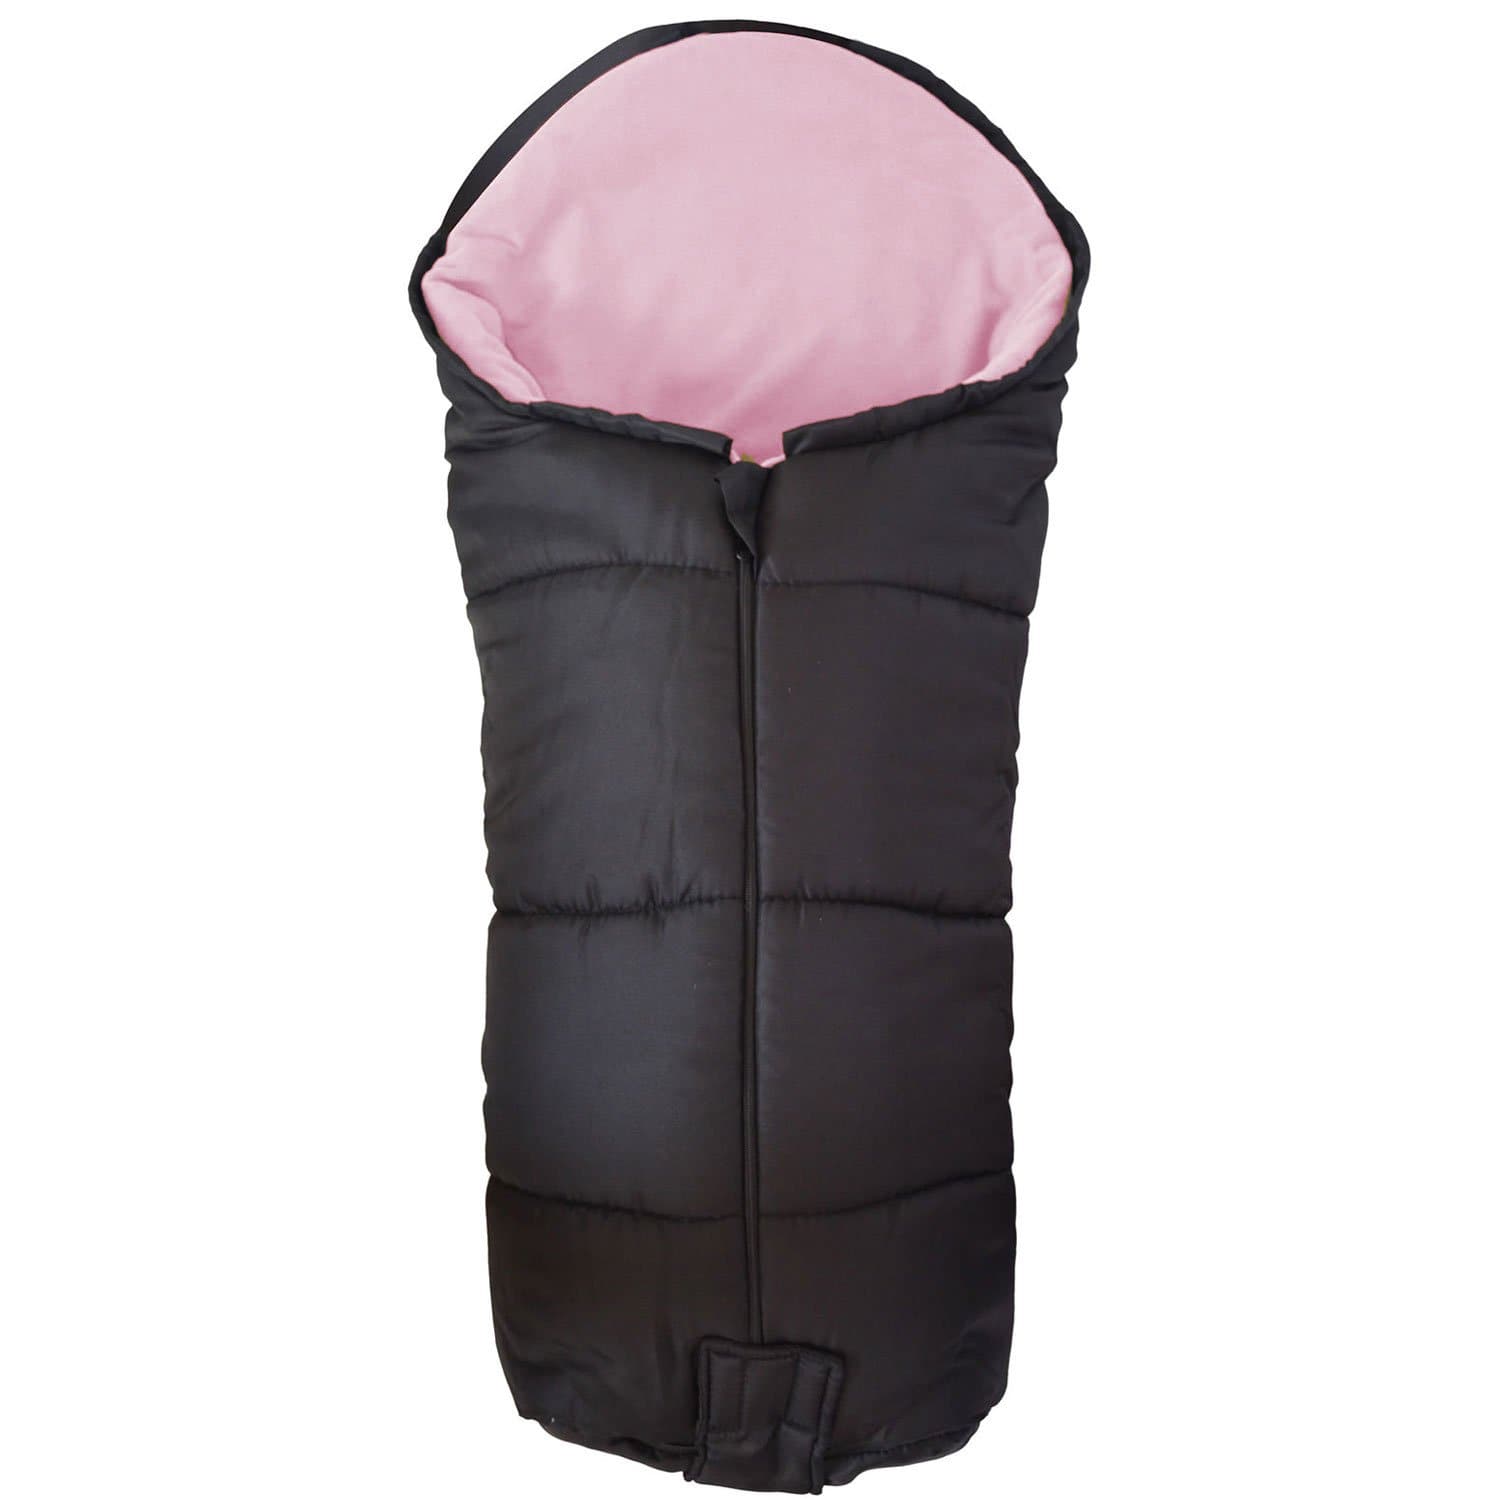 Deluxe Footmuff / Cosy Toes Compatible with Kiddicare - Light Pink / Fits All Models | For Your Little One